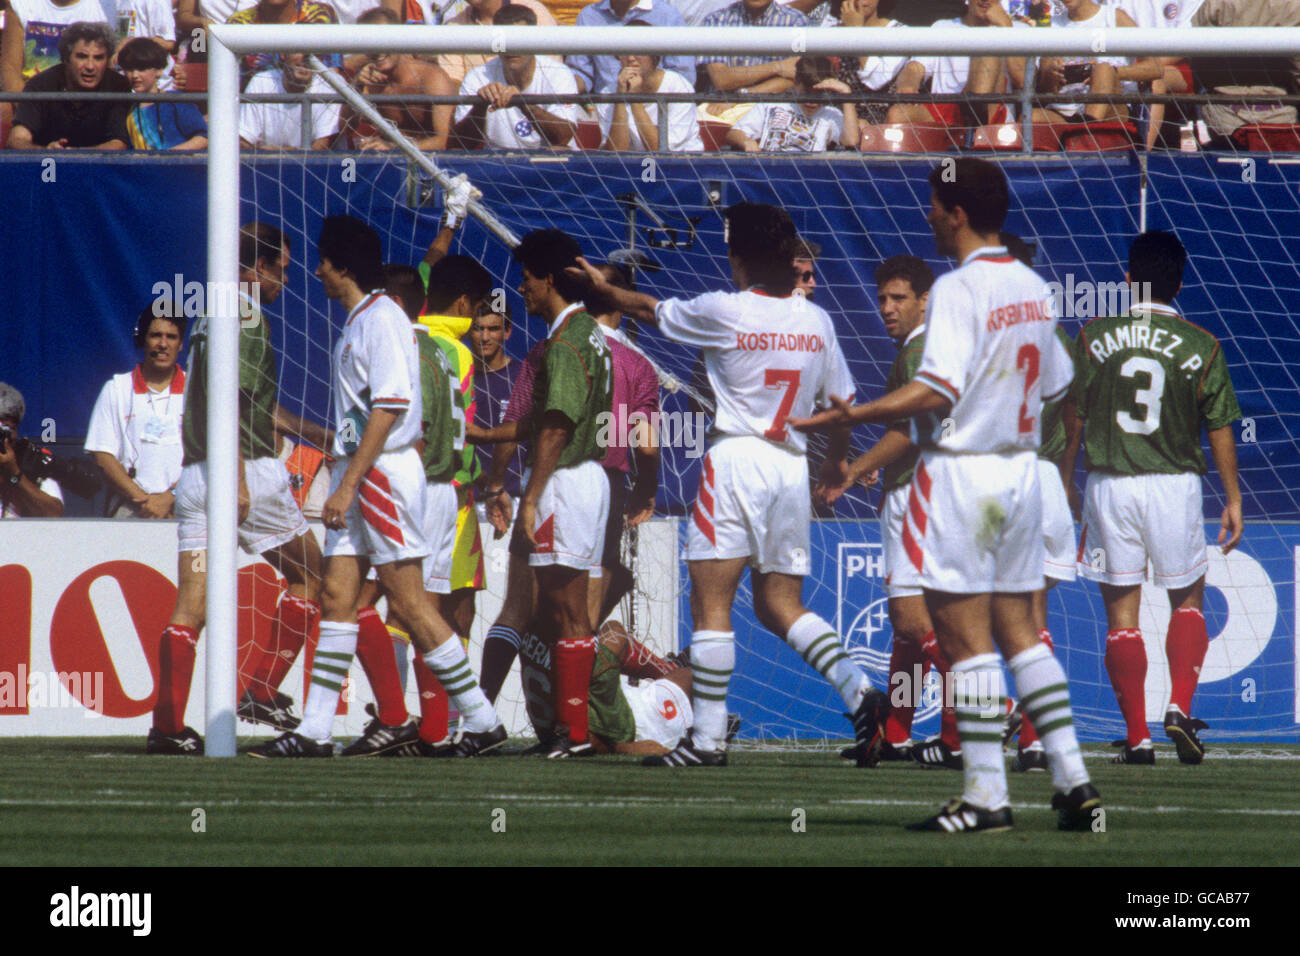 Mexico's Marcelino Bernal (on floor) tries to unravel himself from the goal net after falling into the goal. Mexico Goalkeeper Jorge Campos (hidden) pulls on the broken stanchion. Stock Photo